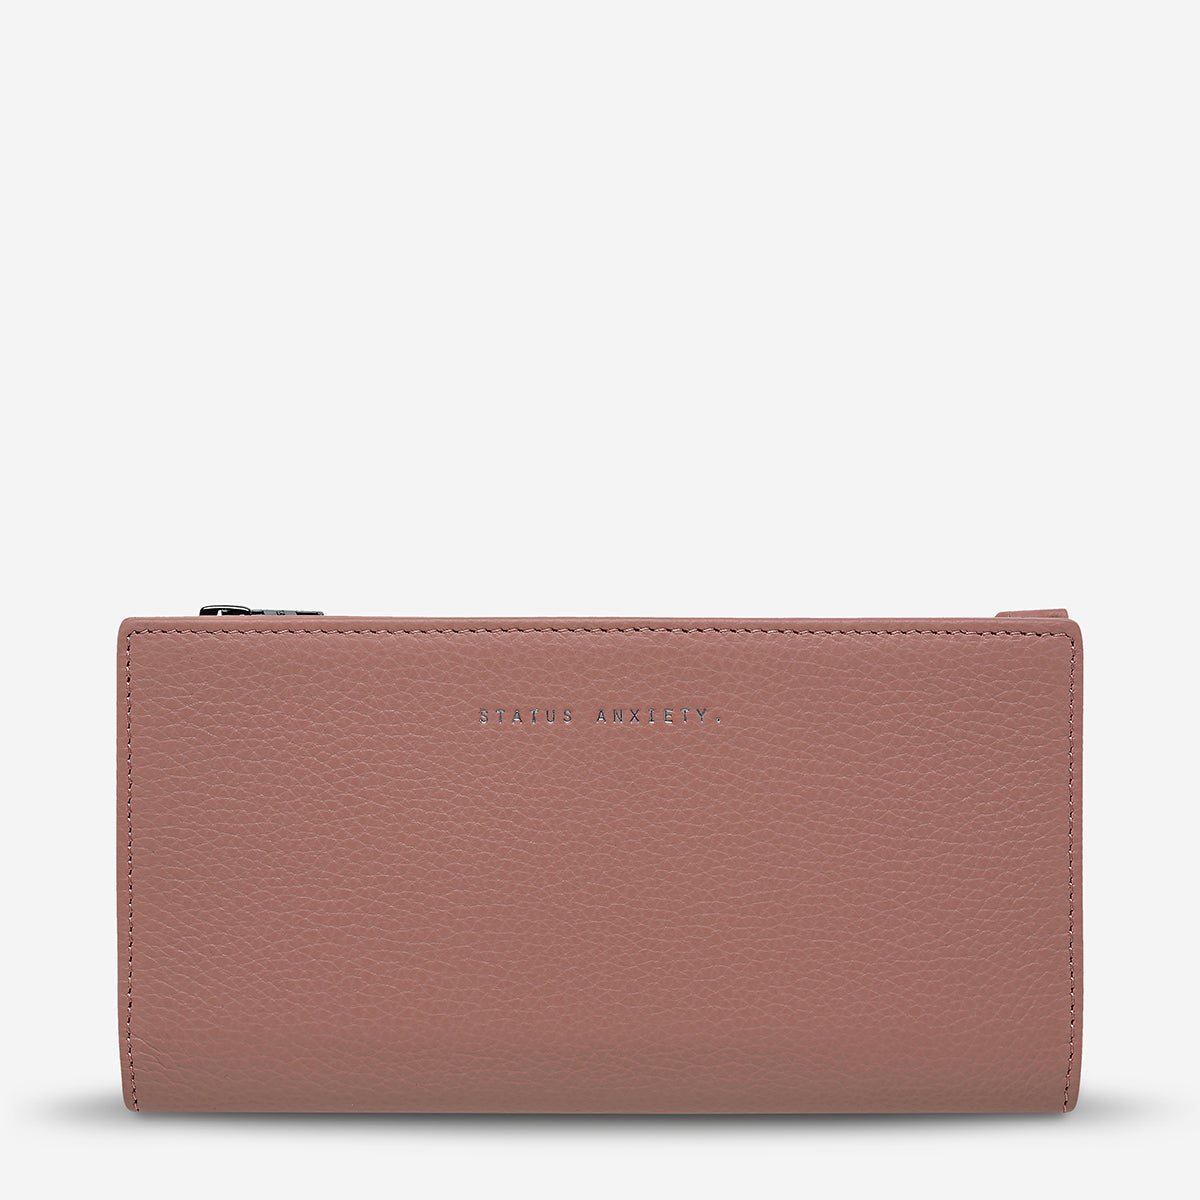 Status Anxiety Old Flame Women's Leather Wallet Dusty Rose